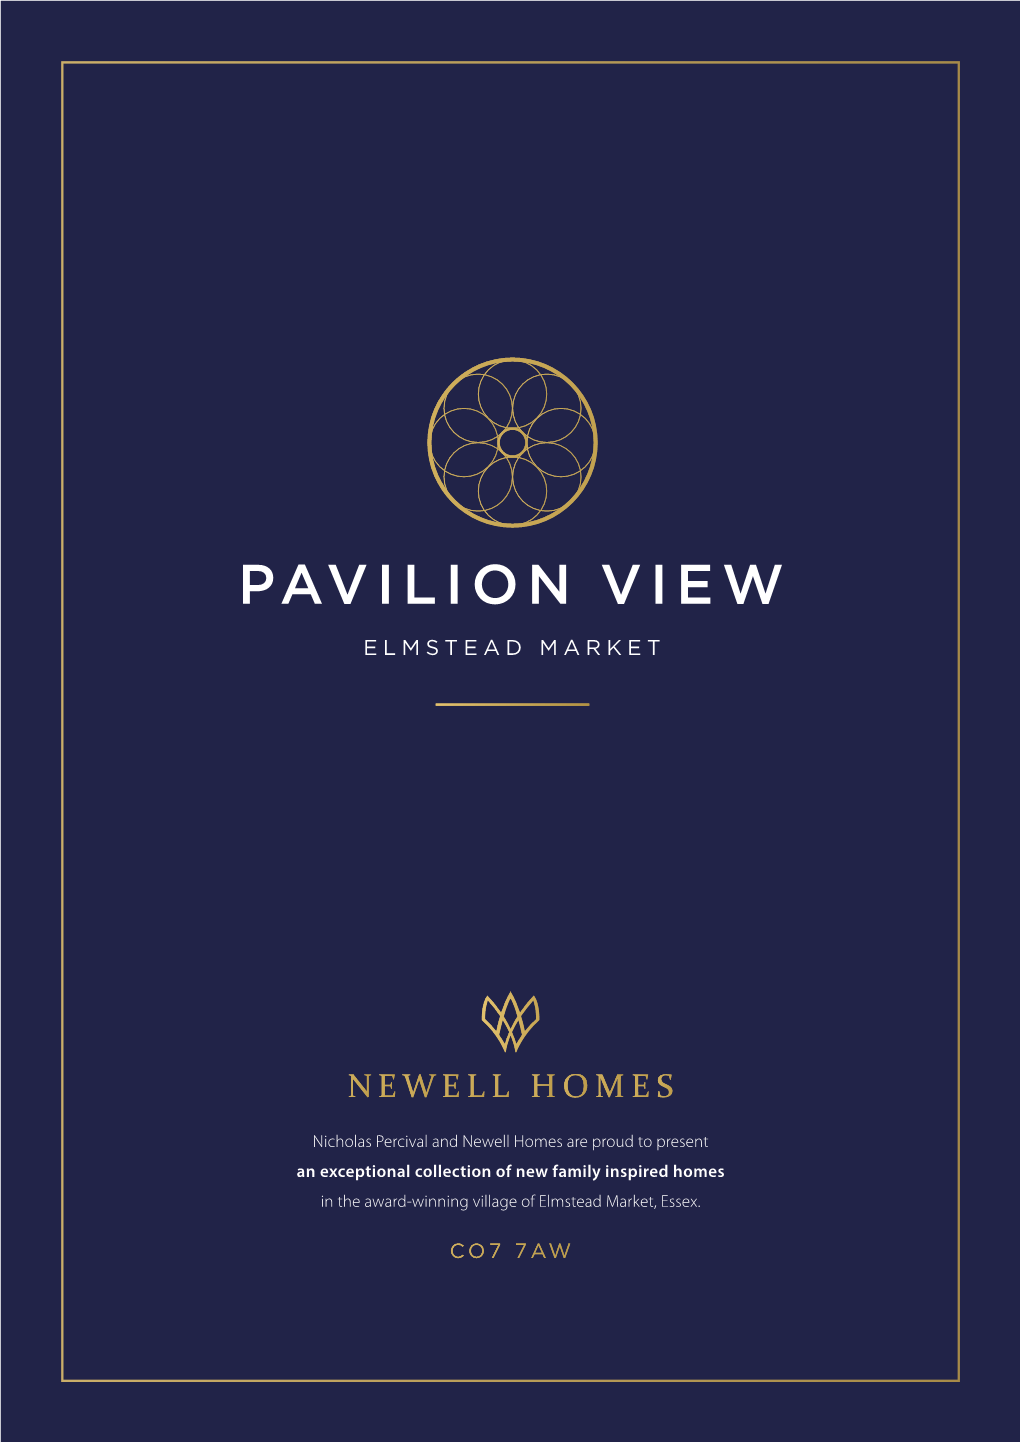 Nicholas Percival and Newell Homes Are Proud to Present an Exceptional Collection of New Family Inspired Homes in the Award-Winning Village of Elmstead Market, Essex